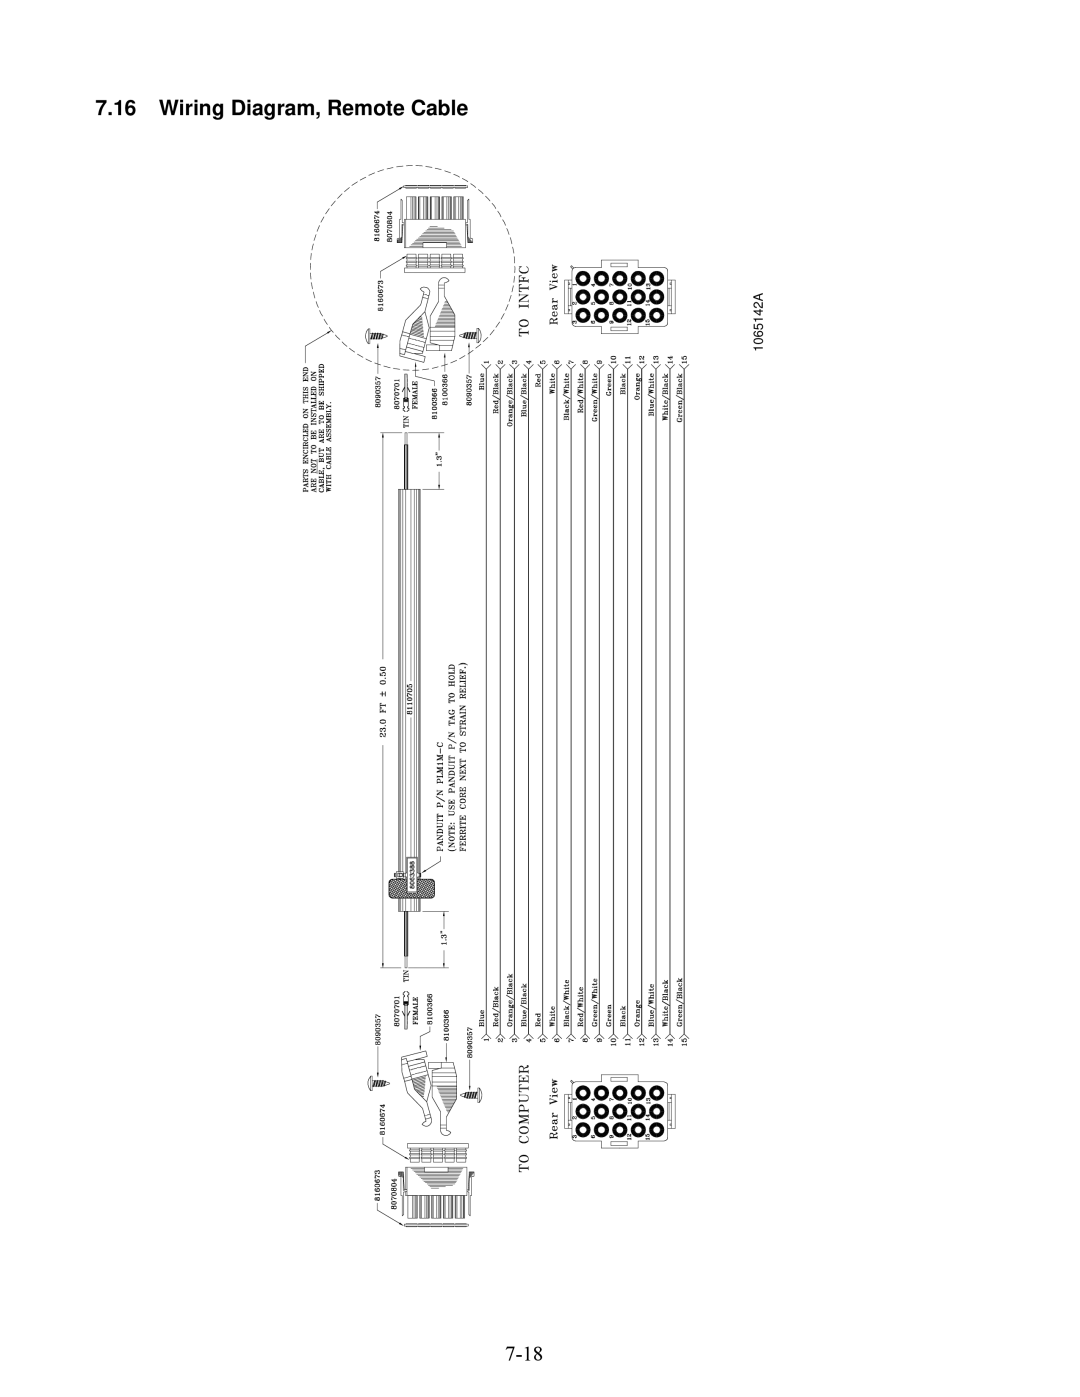 Frymaster E4 manual Wiring Diagram, Remote Cable 